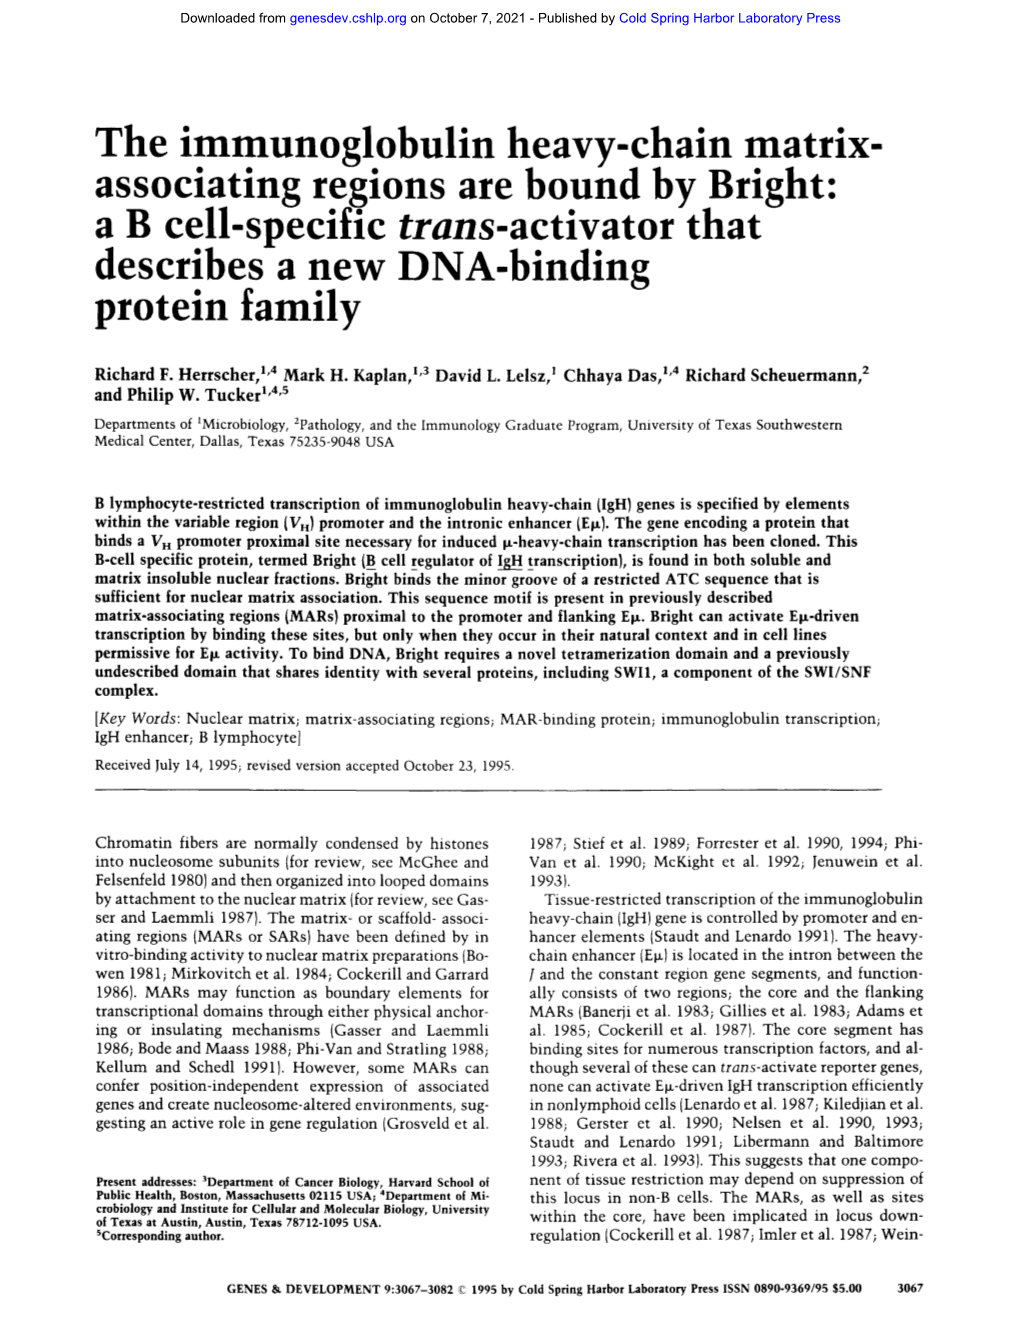 Associating Regions Are Bound by Bright: a B Cell-Specific Trans-Activator That Describes a New DNA-Binding Protein Family